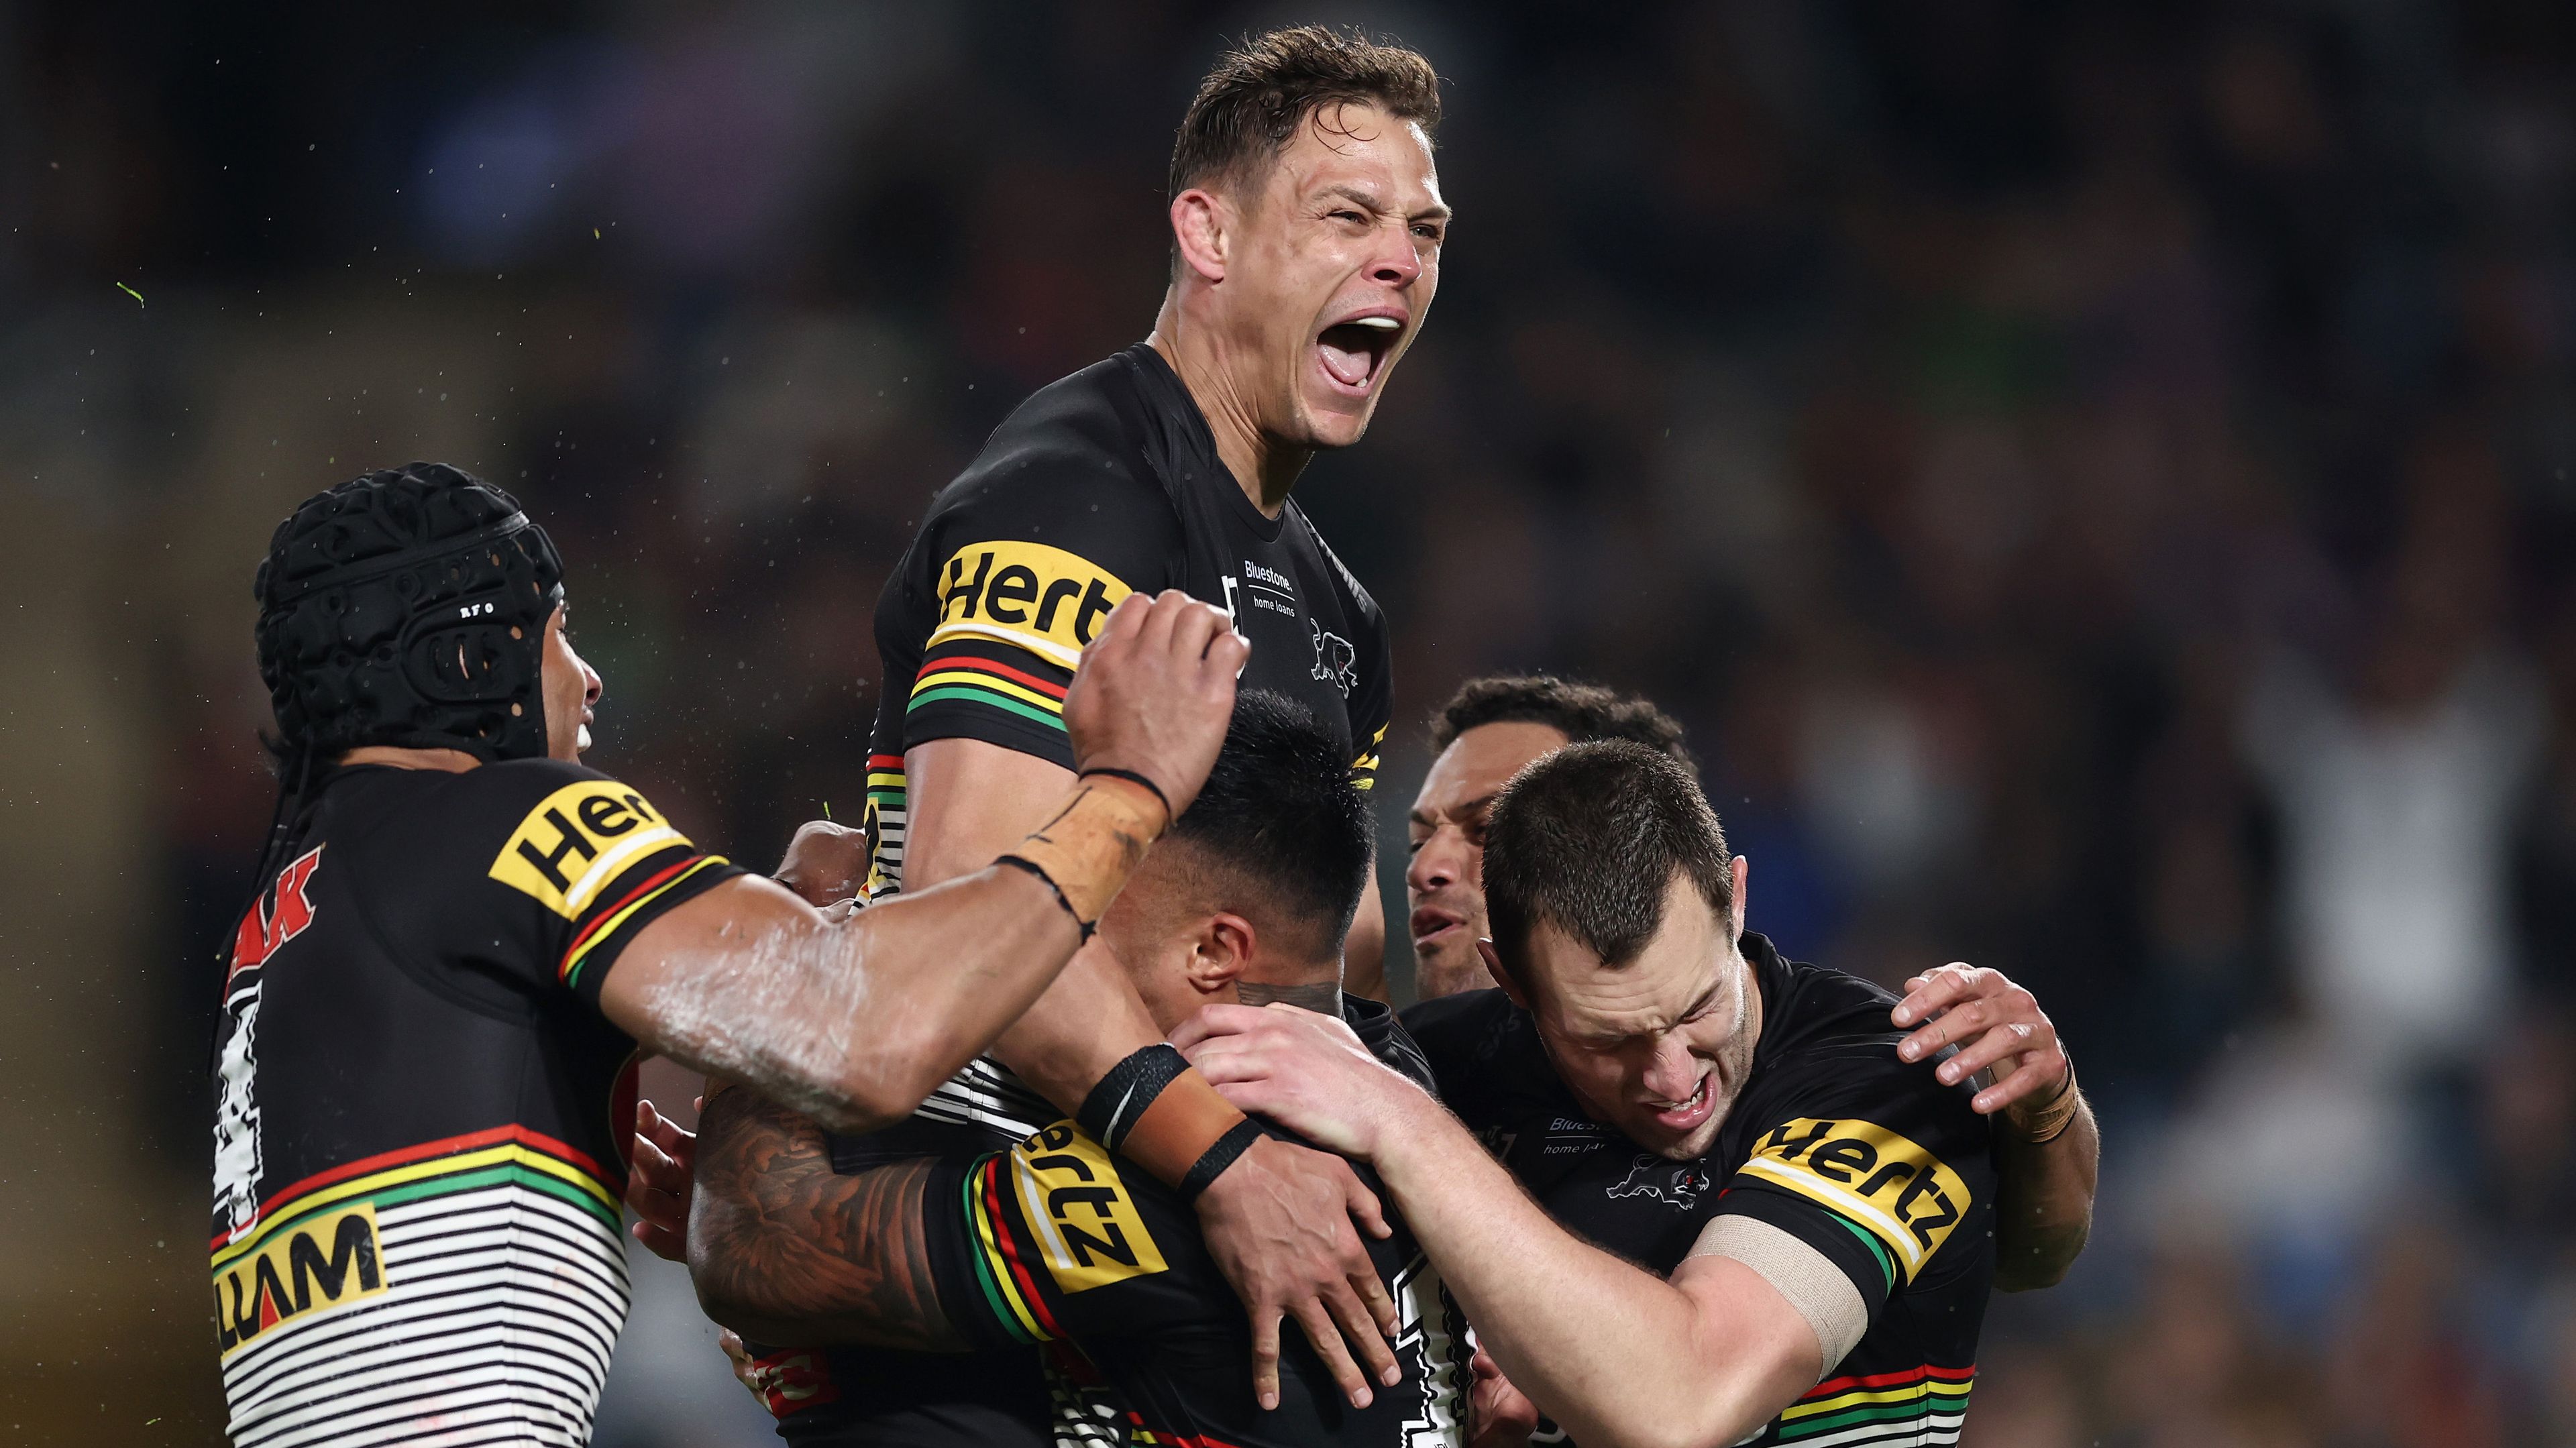 The Panthers celebrate during the NRL Preliminary Final match between the Penrith Panthers and the South Sydney Rabbitohs at Accor Stadium on September 24, 2022 in Sydney, Australia. (Photo by Matt King/Getty Images)